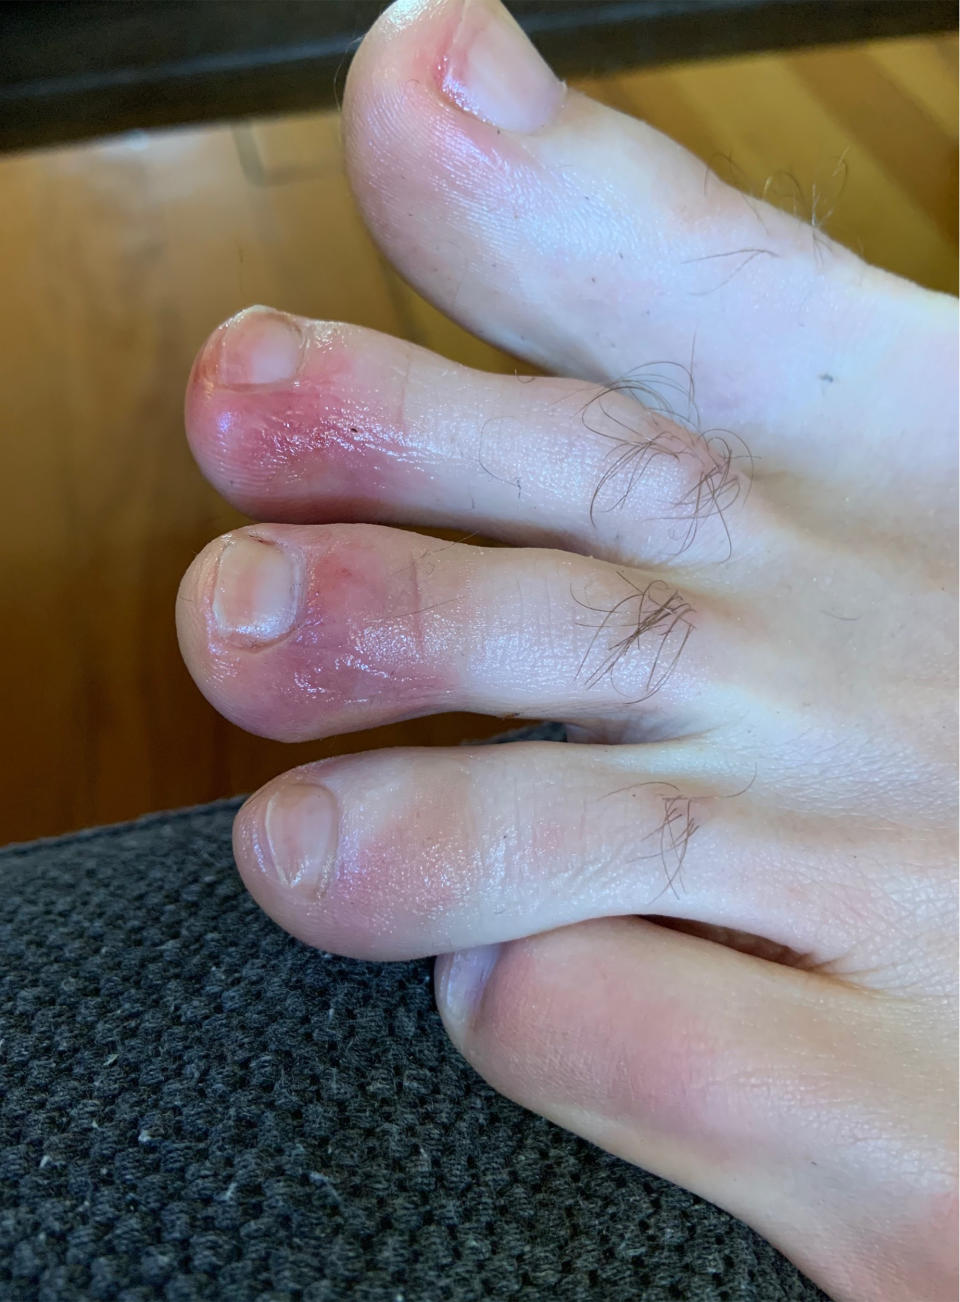 David, 39, said his condition, which appeared to be COVID toes, lasted for about a week. (Courtesy of David)